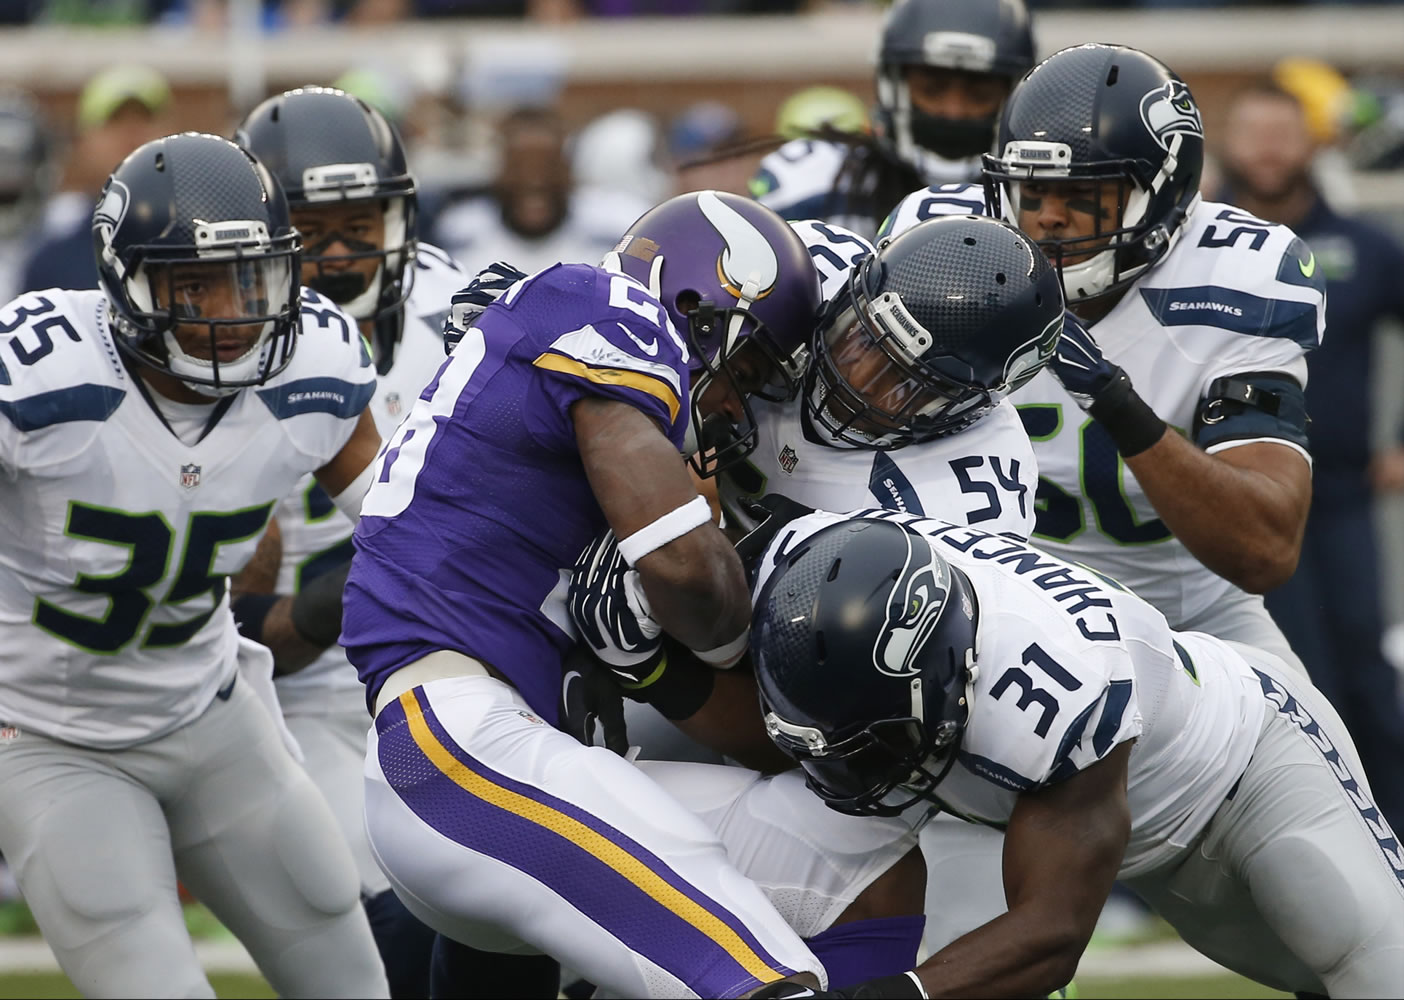 Vikings running back Adrian Peterson (28) is stopped by Seahawks defenders including  Bobby Wagner (54) and Kam Chancellor (31).